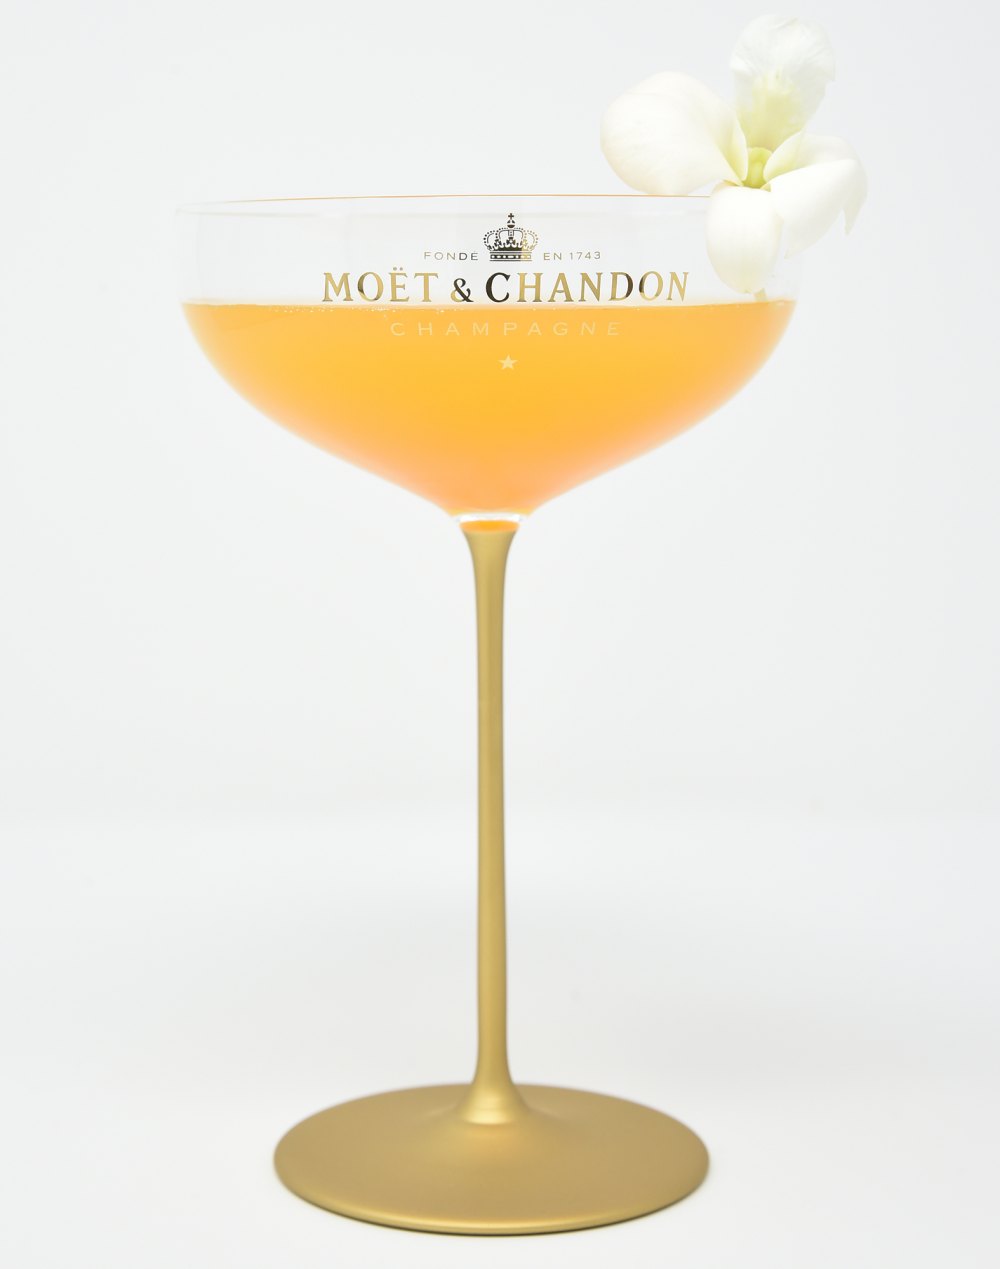 The official Golden Globes cocktail